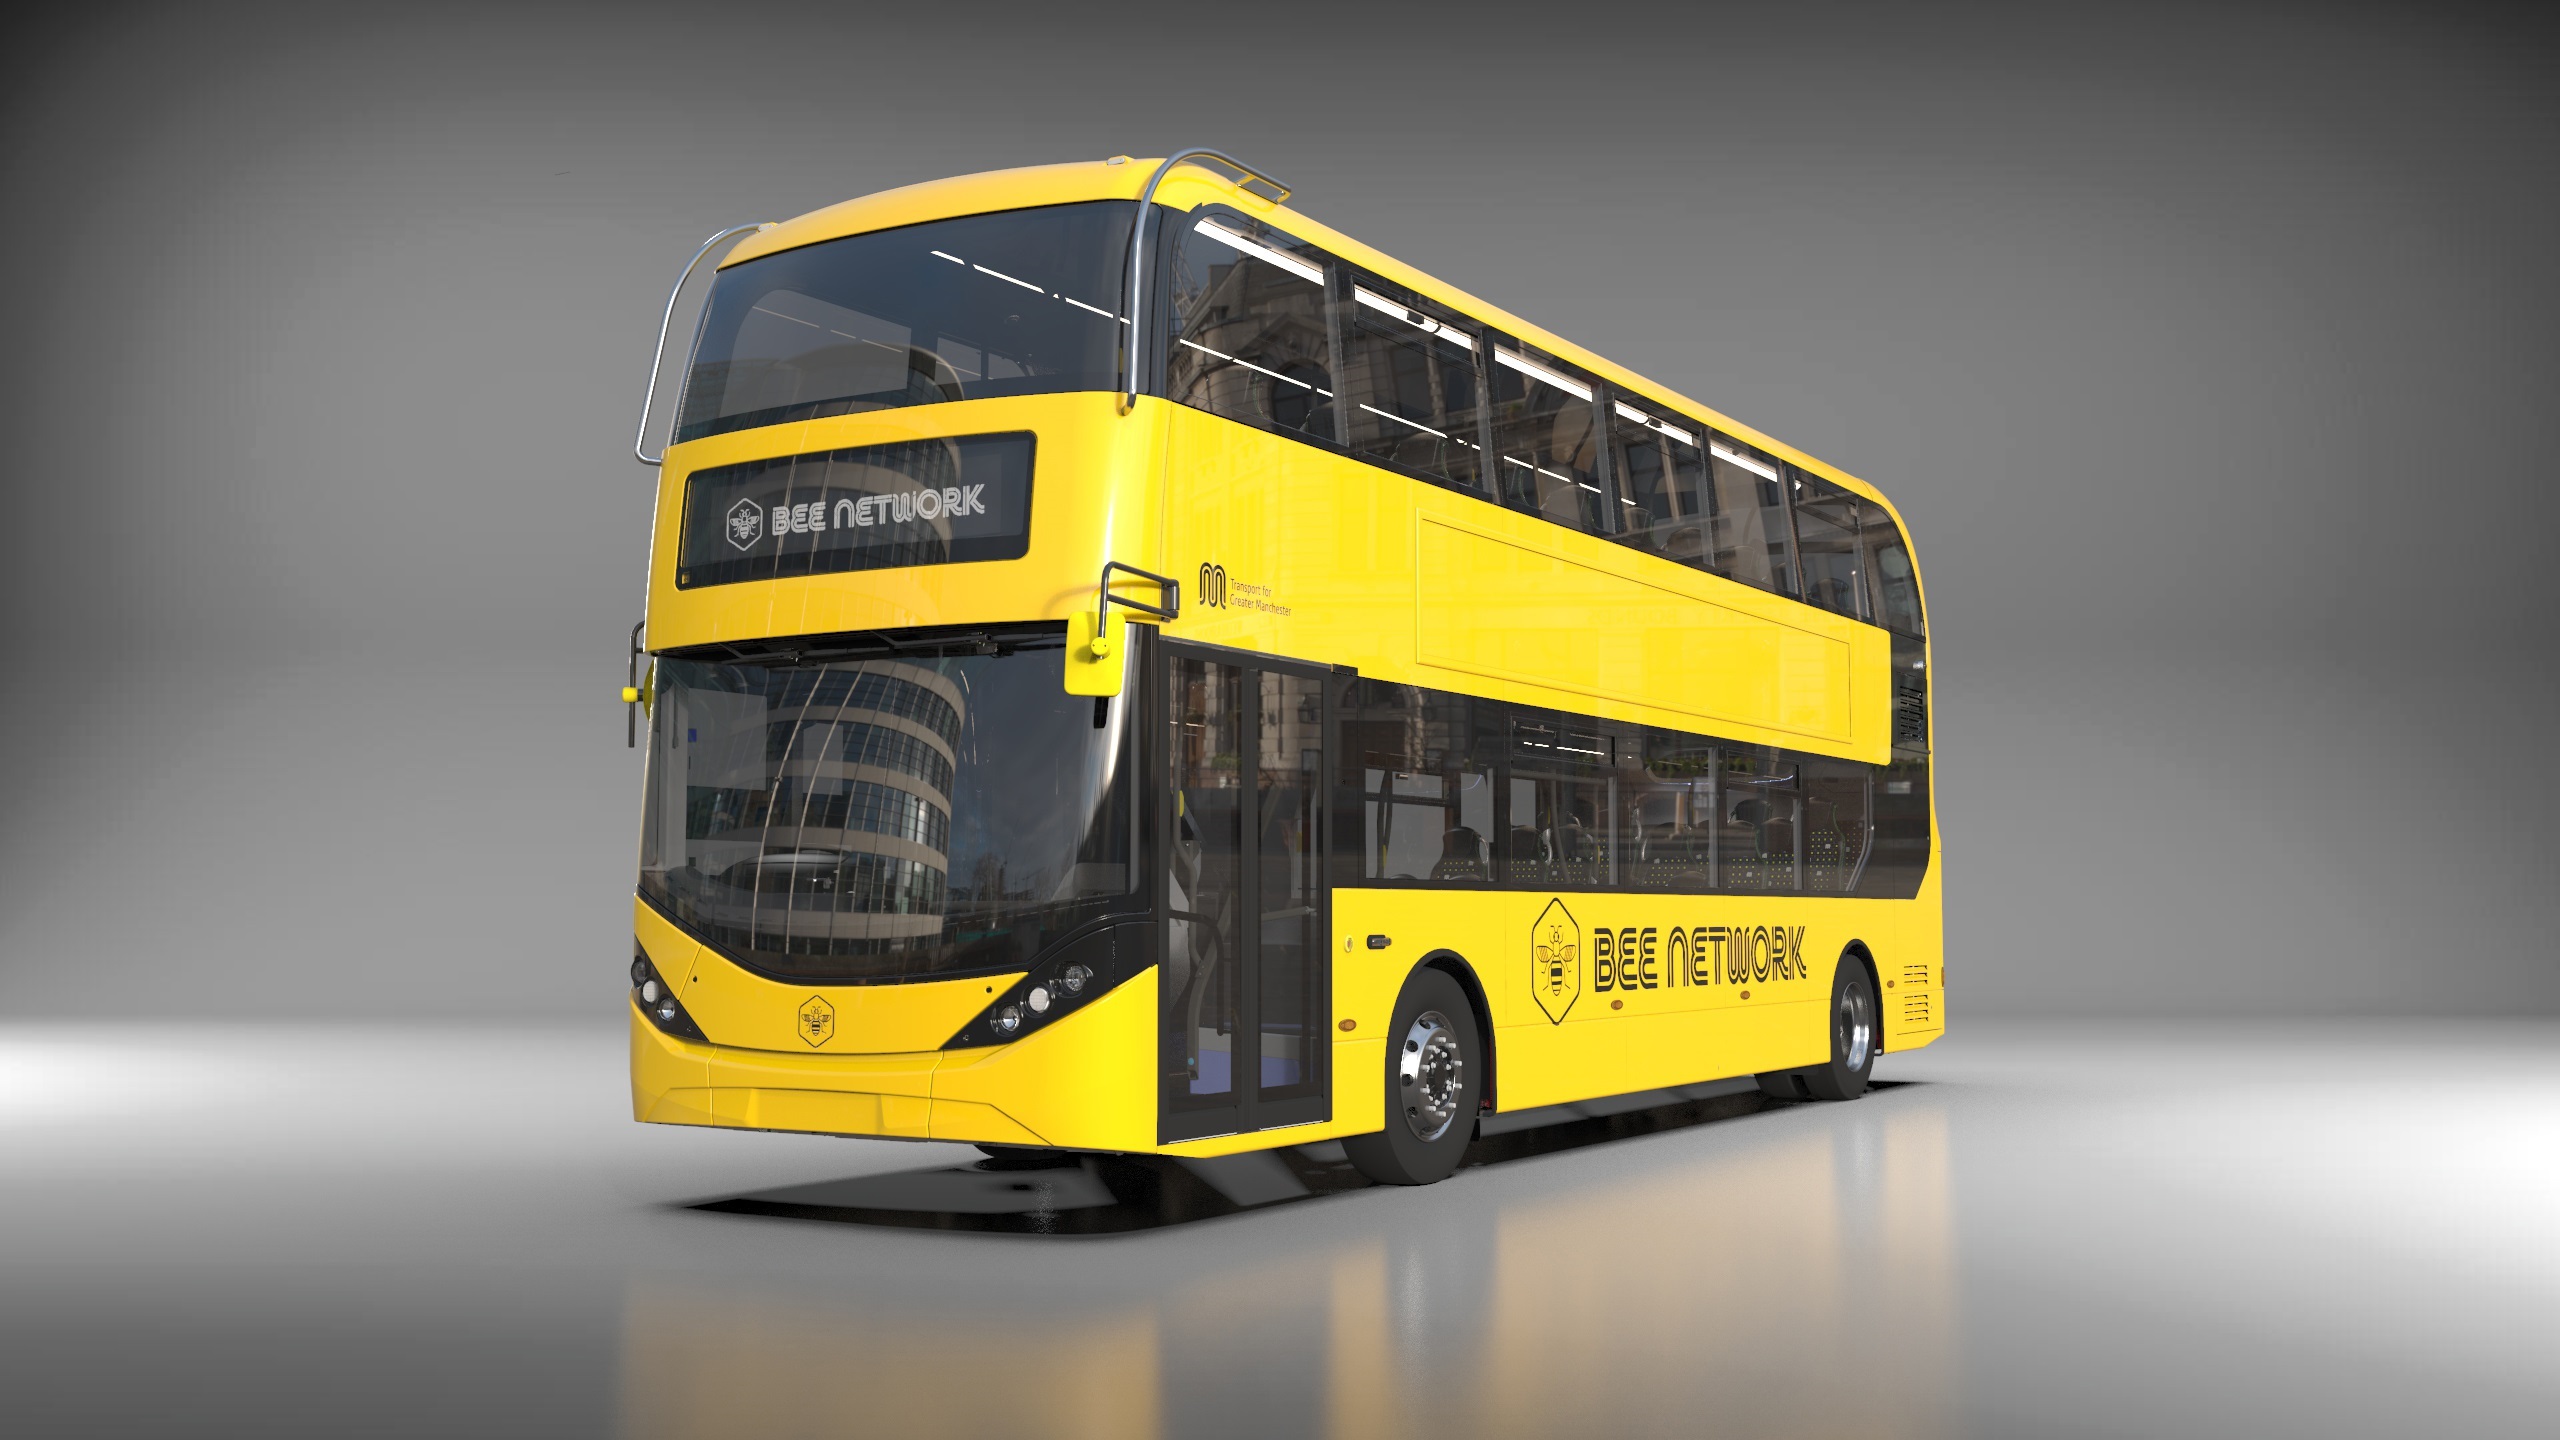 BYD ADL Enviro400EV battery electric bus for Bee Network in Greater Manchester